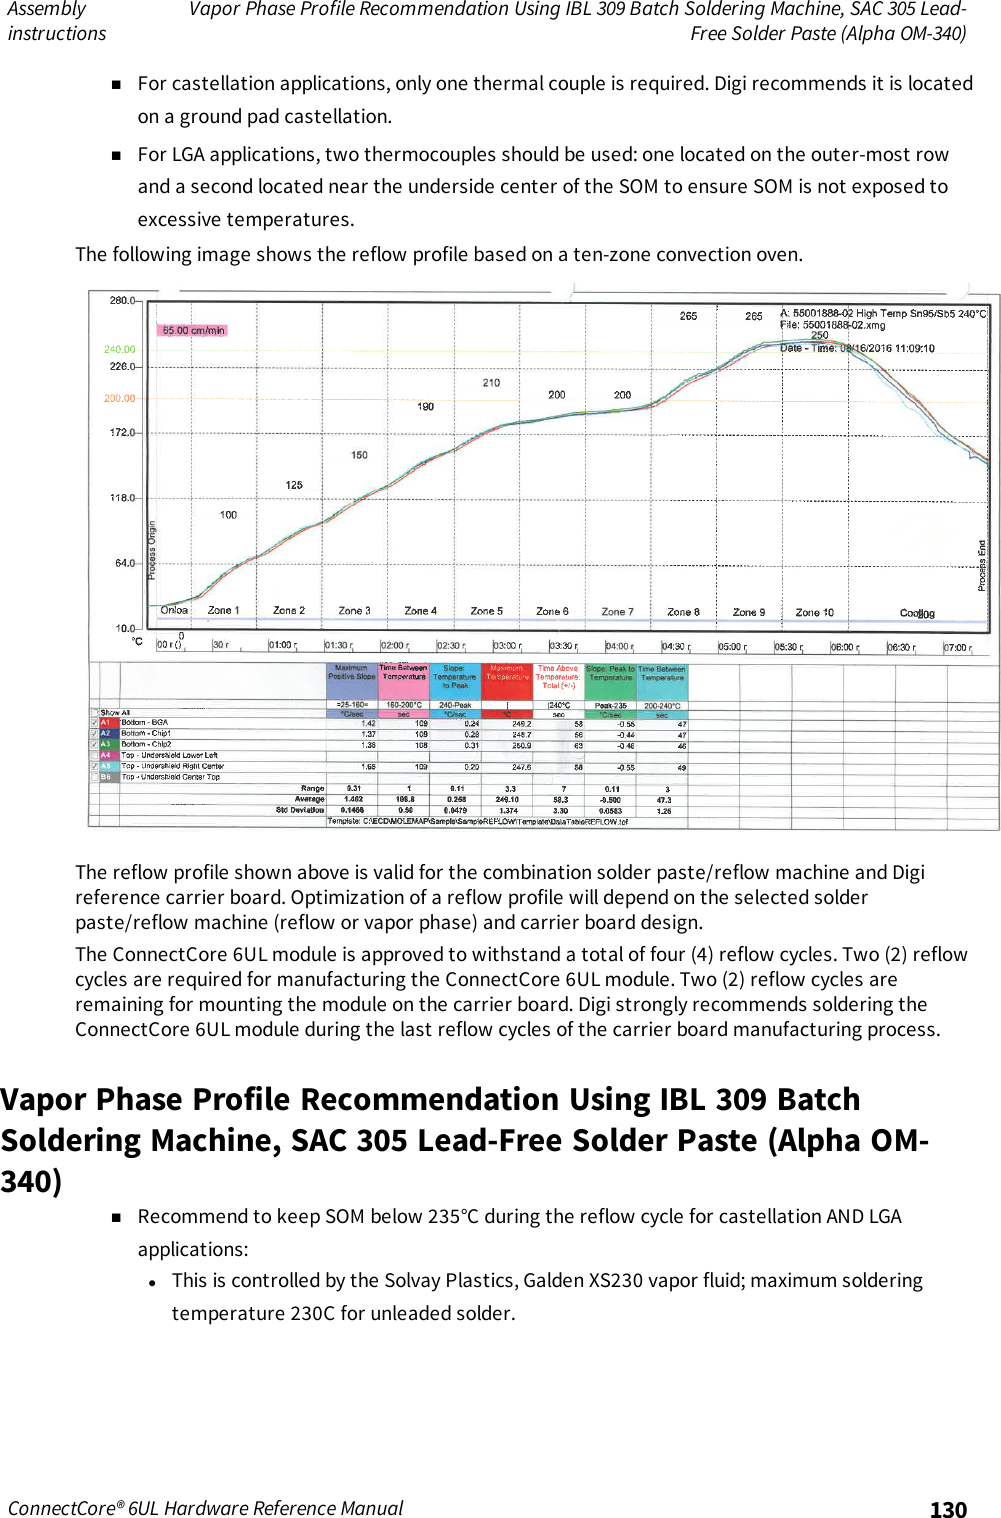 AssemblyinstructionsVapor Phase Profile Recommendation Using IBL 309 Batch Soldering Machine, SAC 305 Lead-Free Solder Paste (Alpha OM-340)ConnectCore® 6UL Hardware Reference Manual 130nFor castellation applications, only one thermal couple is required. Digi recommends it is locatedon a ground pad castellation.nFor LGA applications, two thermocouples should be used: one located on the outer-most rowand a second located near the underside center of the SOM to ensure SOM is not exposed toexcessive temperatures.The following image shows the reflow profile based on a ten-zone convection oven.The reflow profile shown above is valid for the combination solder paste/reflow machine and Digireference carrier board. Optimization of a reflow profile will depend on the selected solderpaste/reflow machine (reflow or vapor phase) and carrier board design.The ConnectCore 6UL module is approved to withstand a total of four (4) reflow cycles. Two (2) reflowcycles are required for manufacturing the ConnectCore 6UL module. Two (2) reflow cycles areremaining for mounting the module on the carrier board. Digi strongly recommends soldering theConnectCore 6UL module during the last reflow cycles of the carrier board manufacturing process.Vapor Phase Profile Recommendation Using IBL 309 BatchSoldering Machine, SAC 305 Lead-Free Solder Paste (Alpha OM-340)nRecommend to keep SOM below 235°C during the reflow cycle for castellation AND LGAapplications:lThis is controlled by the Solvay Plastics, Galden XS230 vapor fluid; maximum solderingtemperature 230C for unleaded solder.